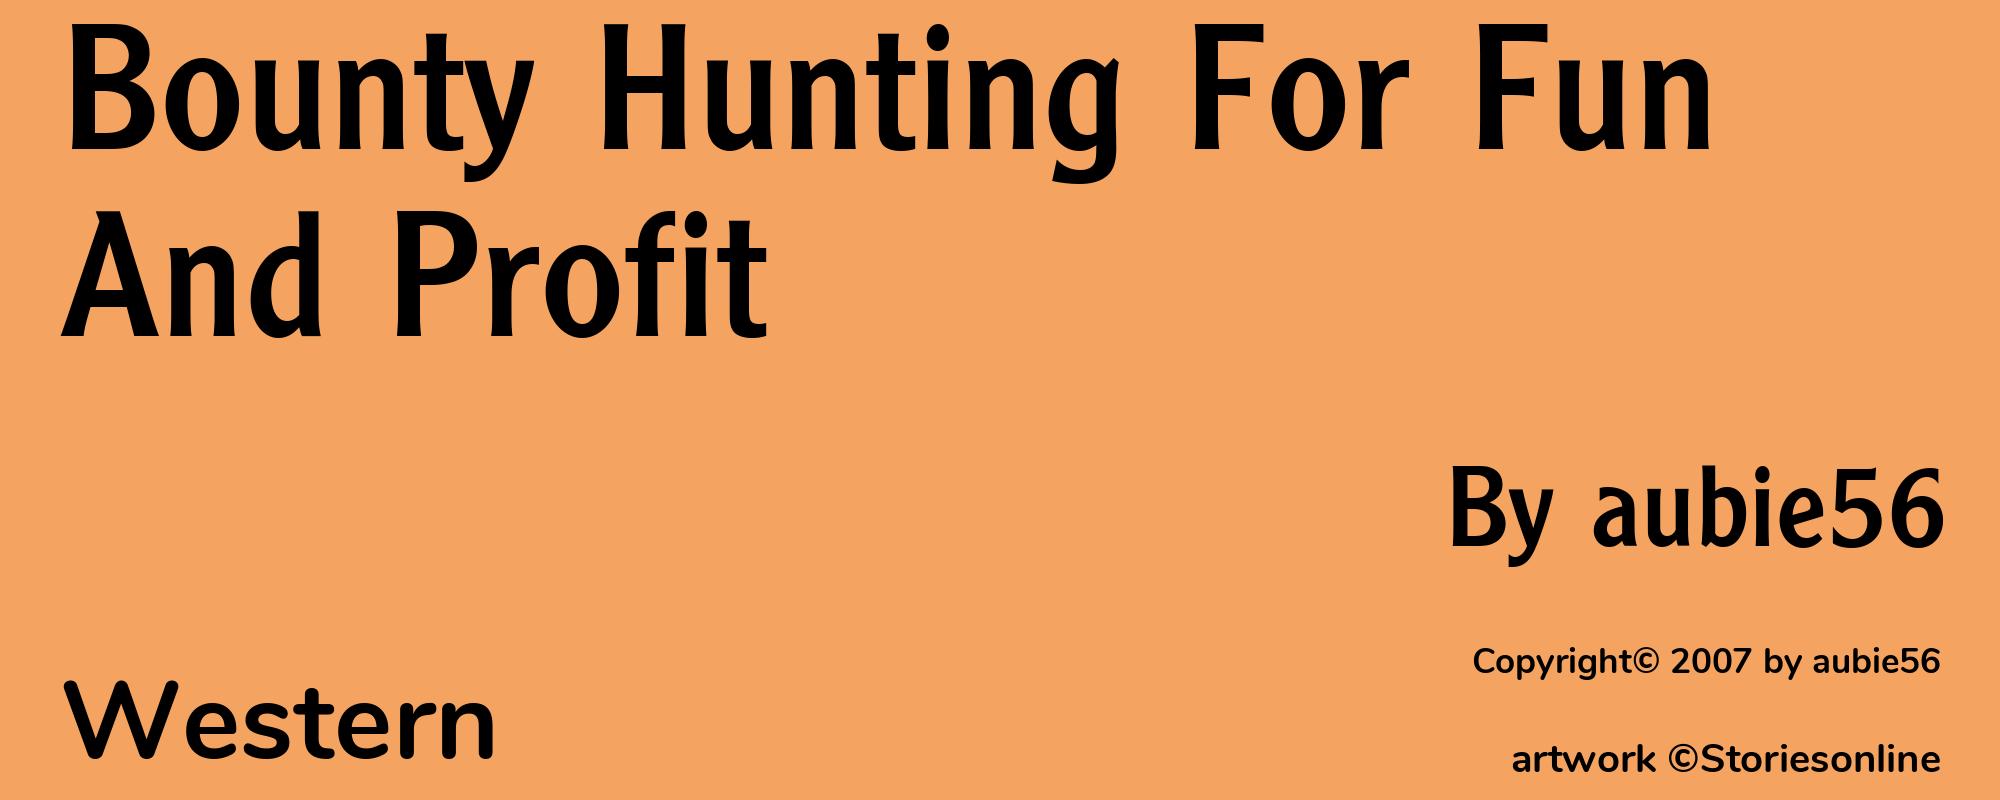 Bounty Hunting For Fun And Profit - Cover